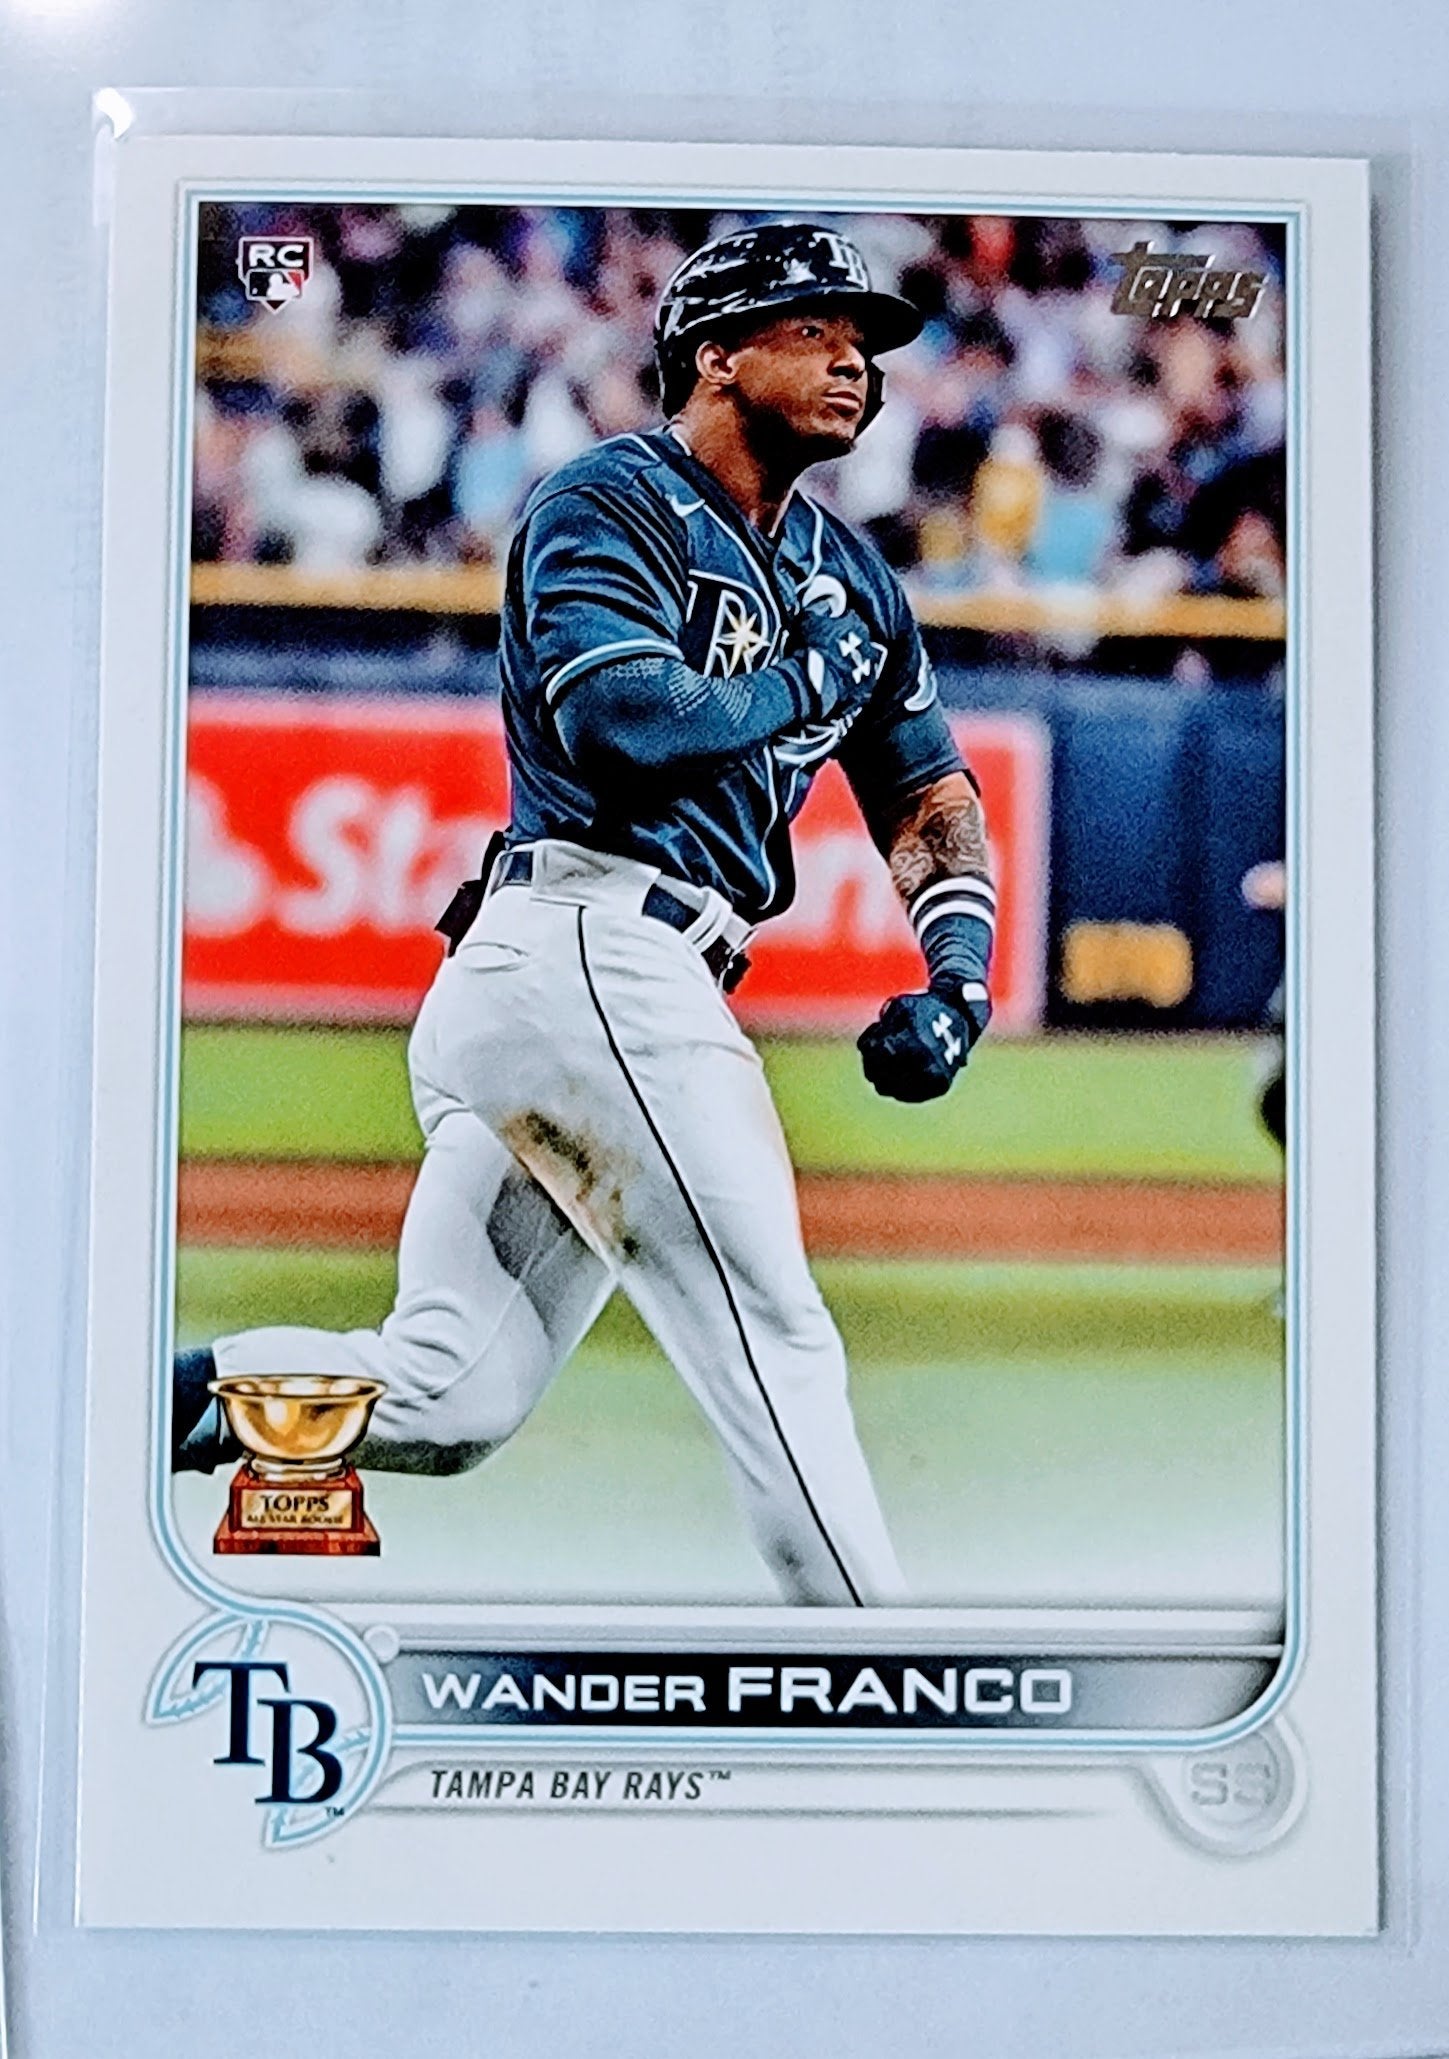 2022 Topps Wander Franco All Star Rookie Cup Baseball Trading Card GRB1 simple Xclusive Collectibles   